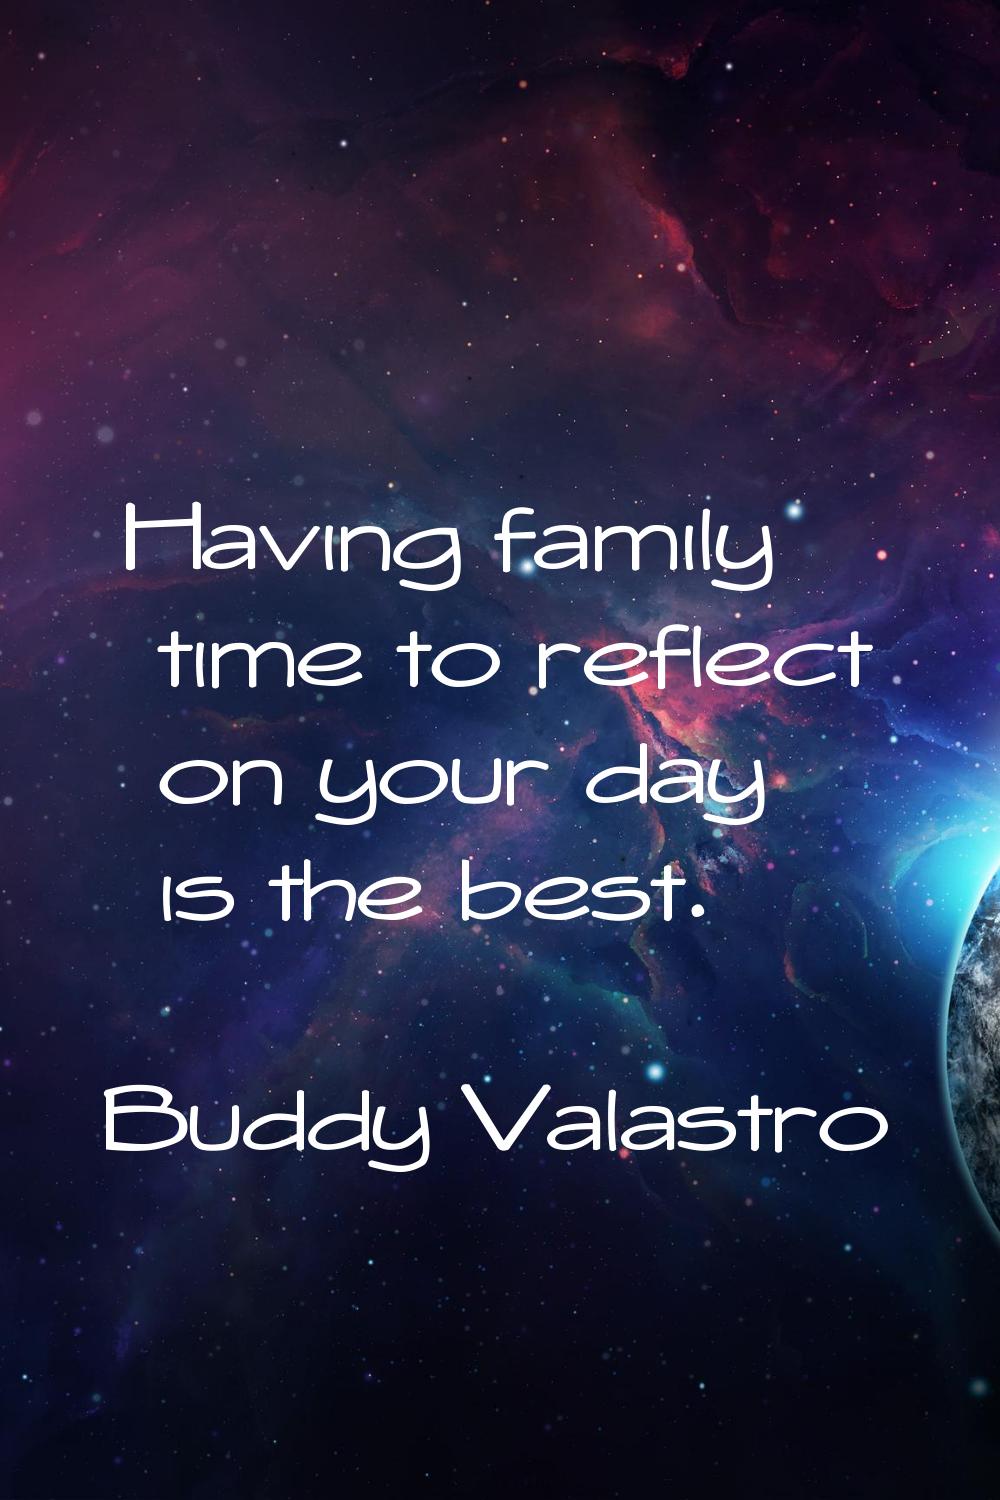 Having family time to reflect on your day is the best.